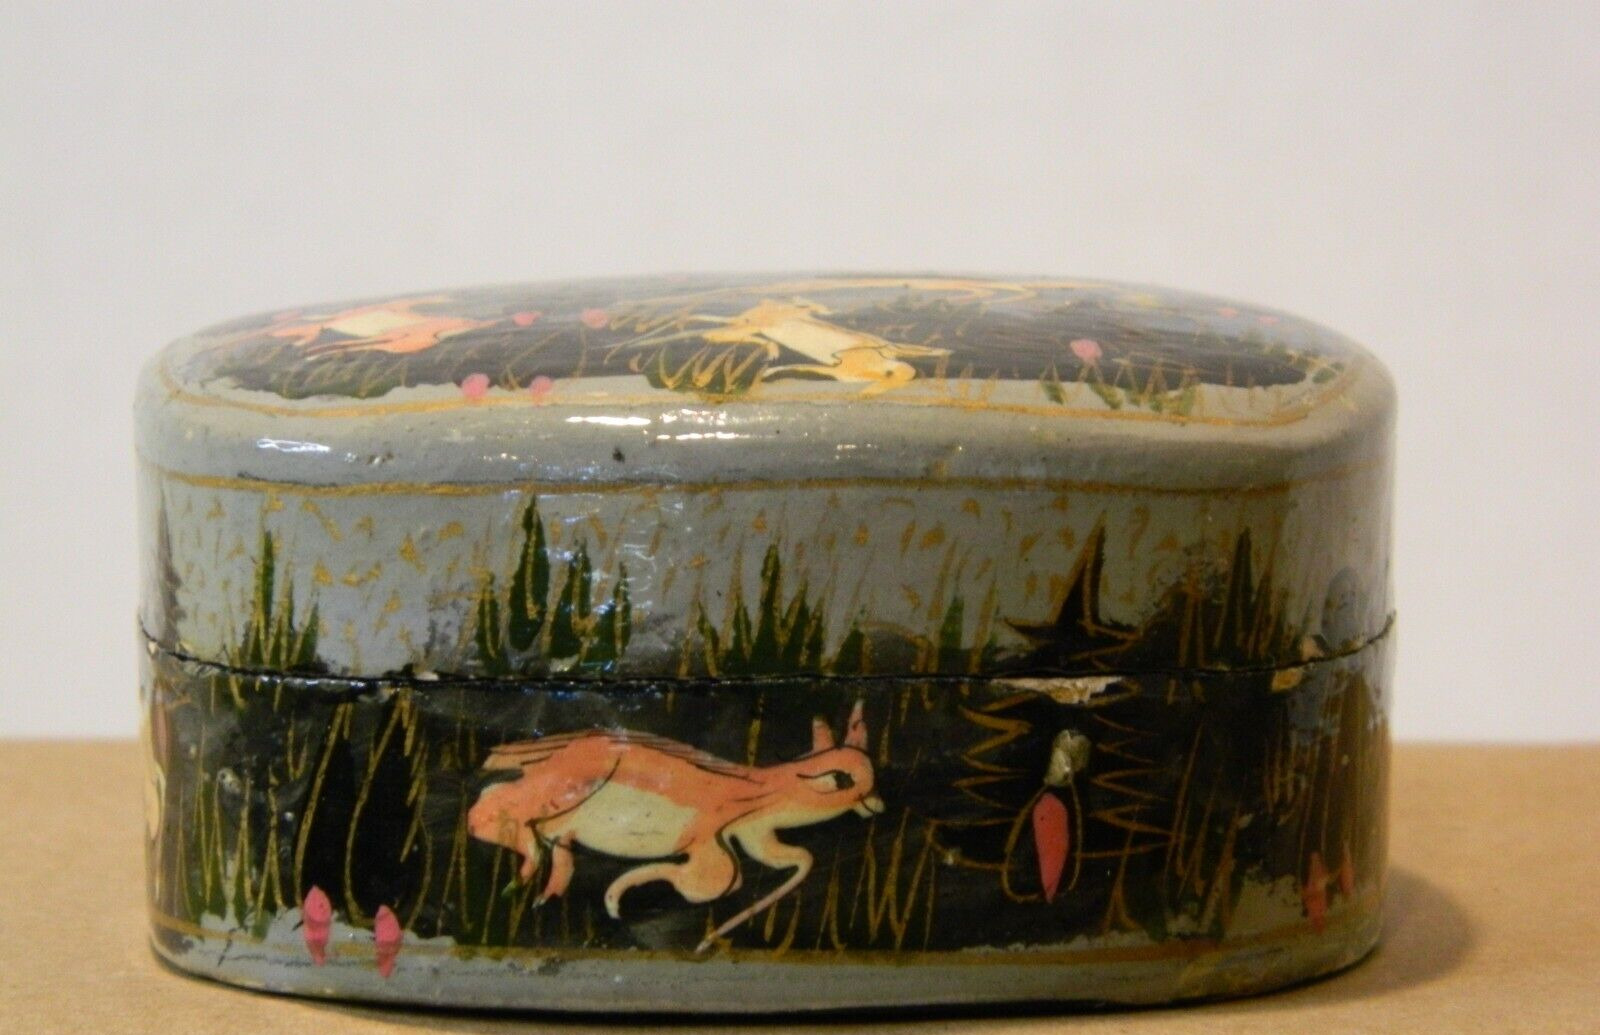 A small vintage lacquer box, hand-painted with forest animals maybe from Kashmir